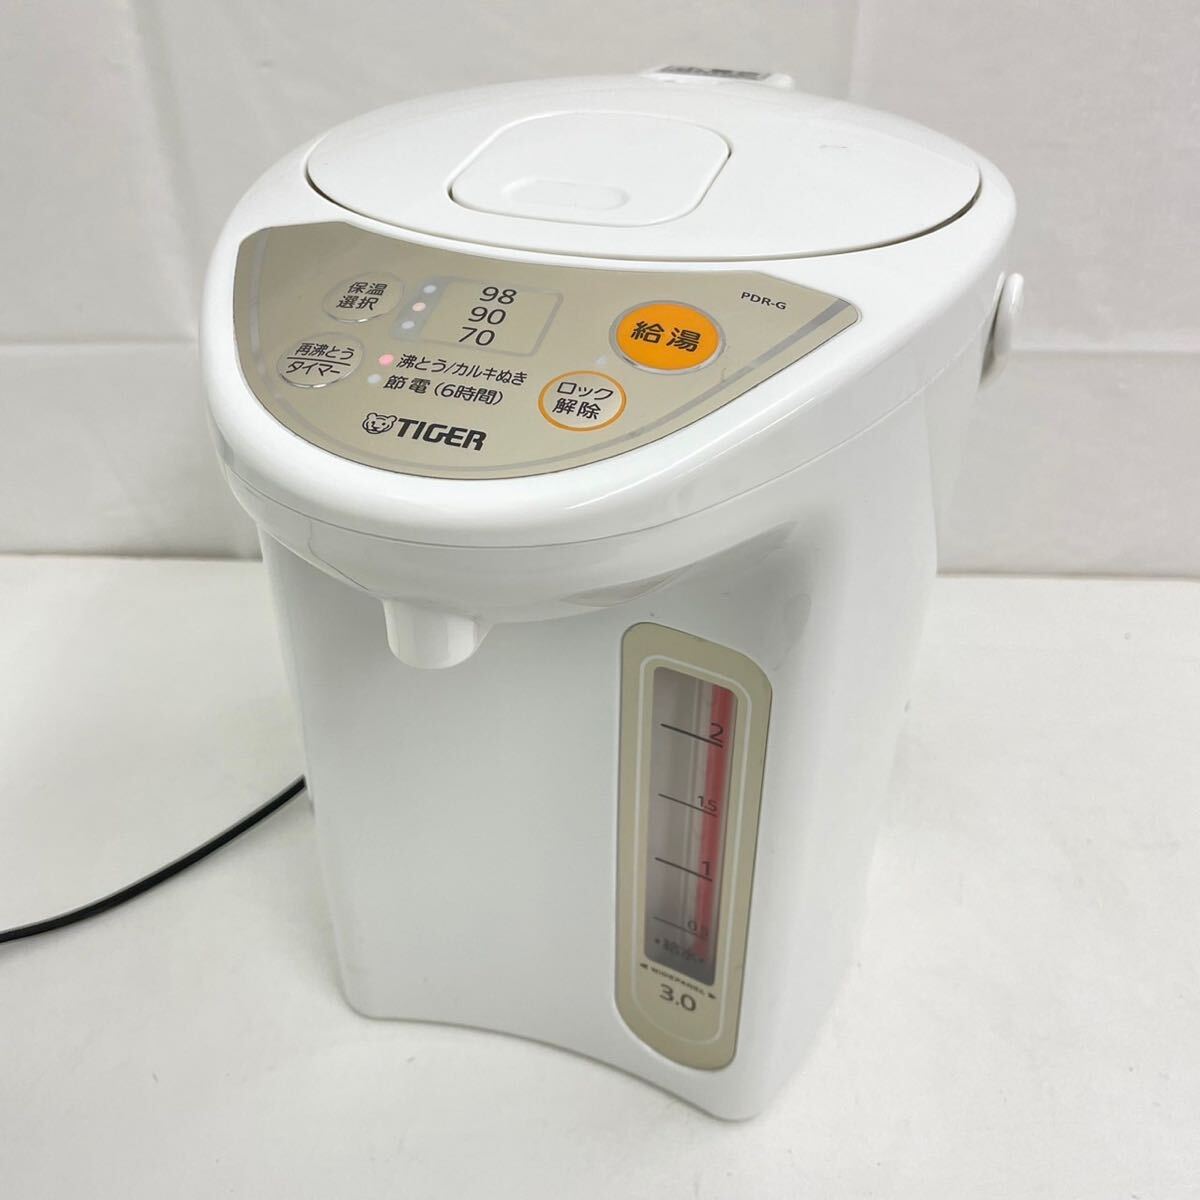 142*[ electrification verification settled ]TIGER Tiger microcomputer electric pot PDR-G300 urban white 2022 year made capacity 3.0L *